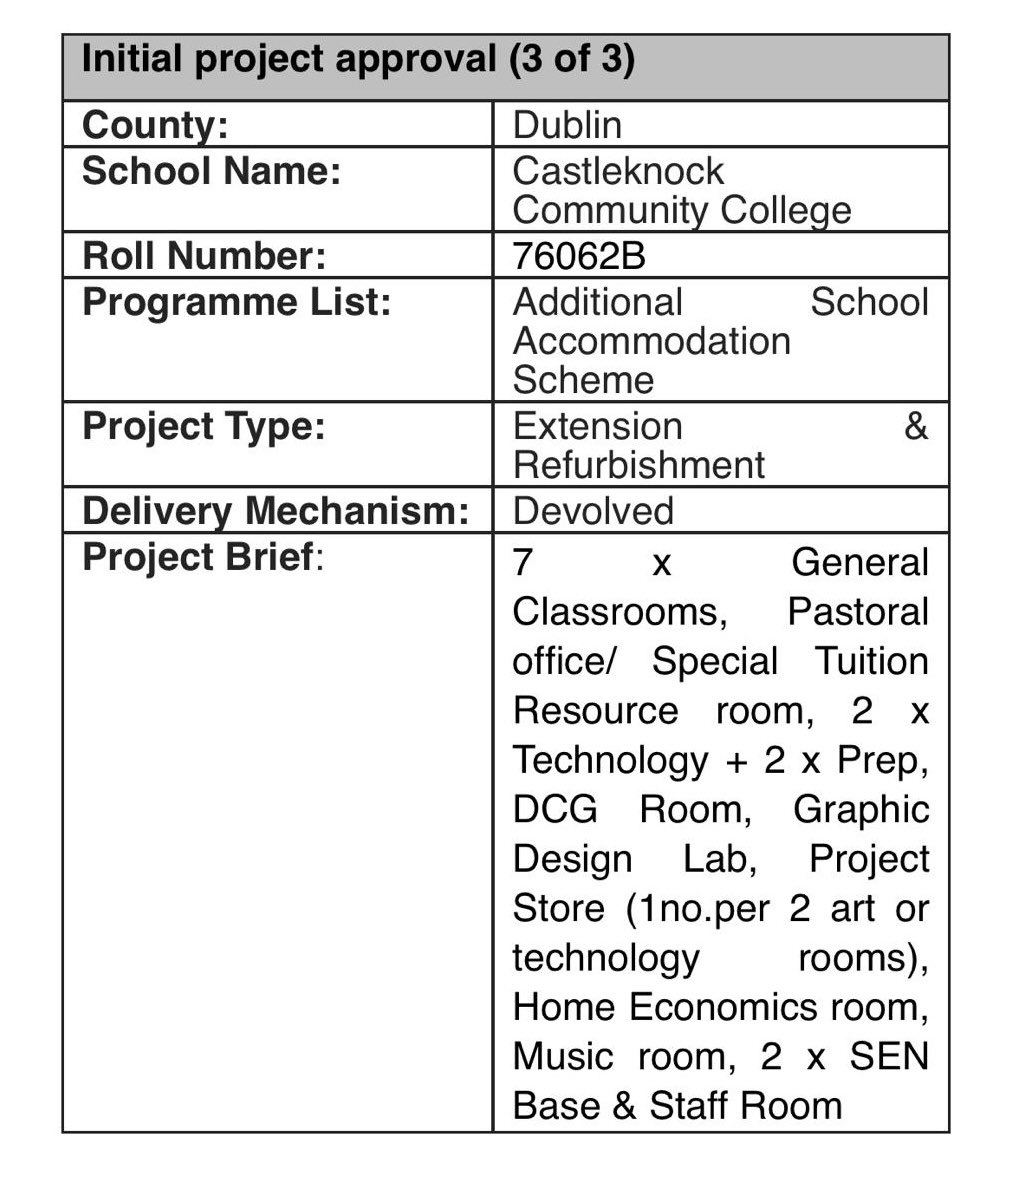 Castleknock Community College Permanent Extension Announcement 5pm today: In addition to the modular building project announced in January, a large-scale multi-million traditional building project will now proceed with the appointment of a design team at CCC.